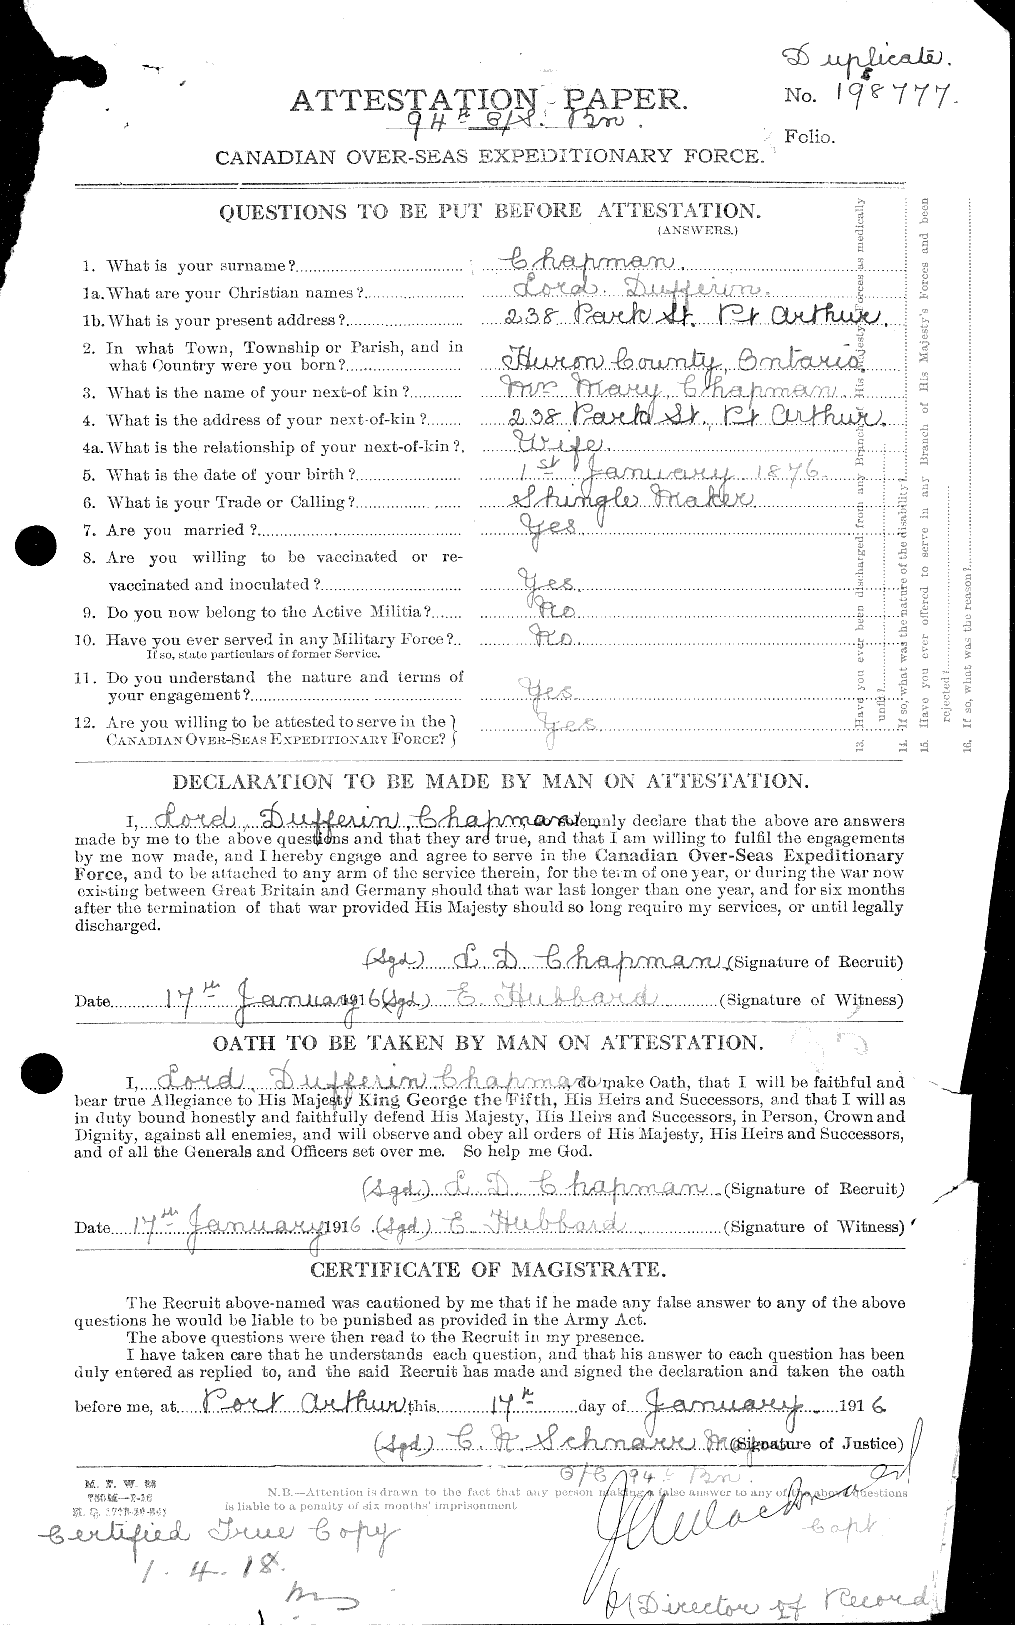 Personnel Records of the First World War - CEF 014753a